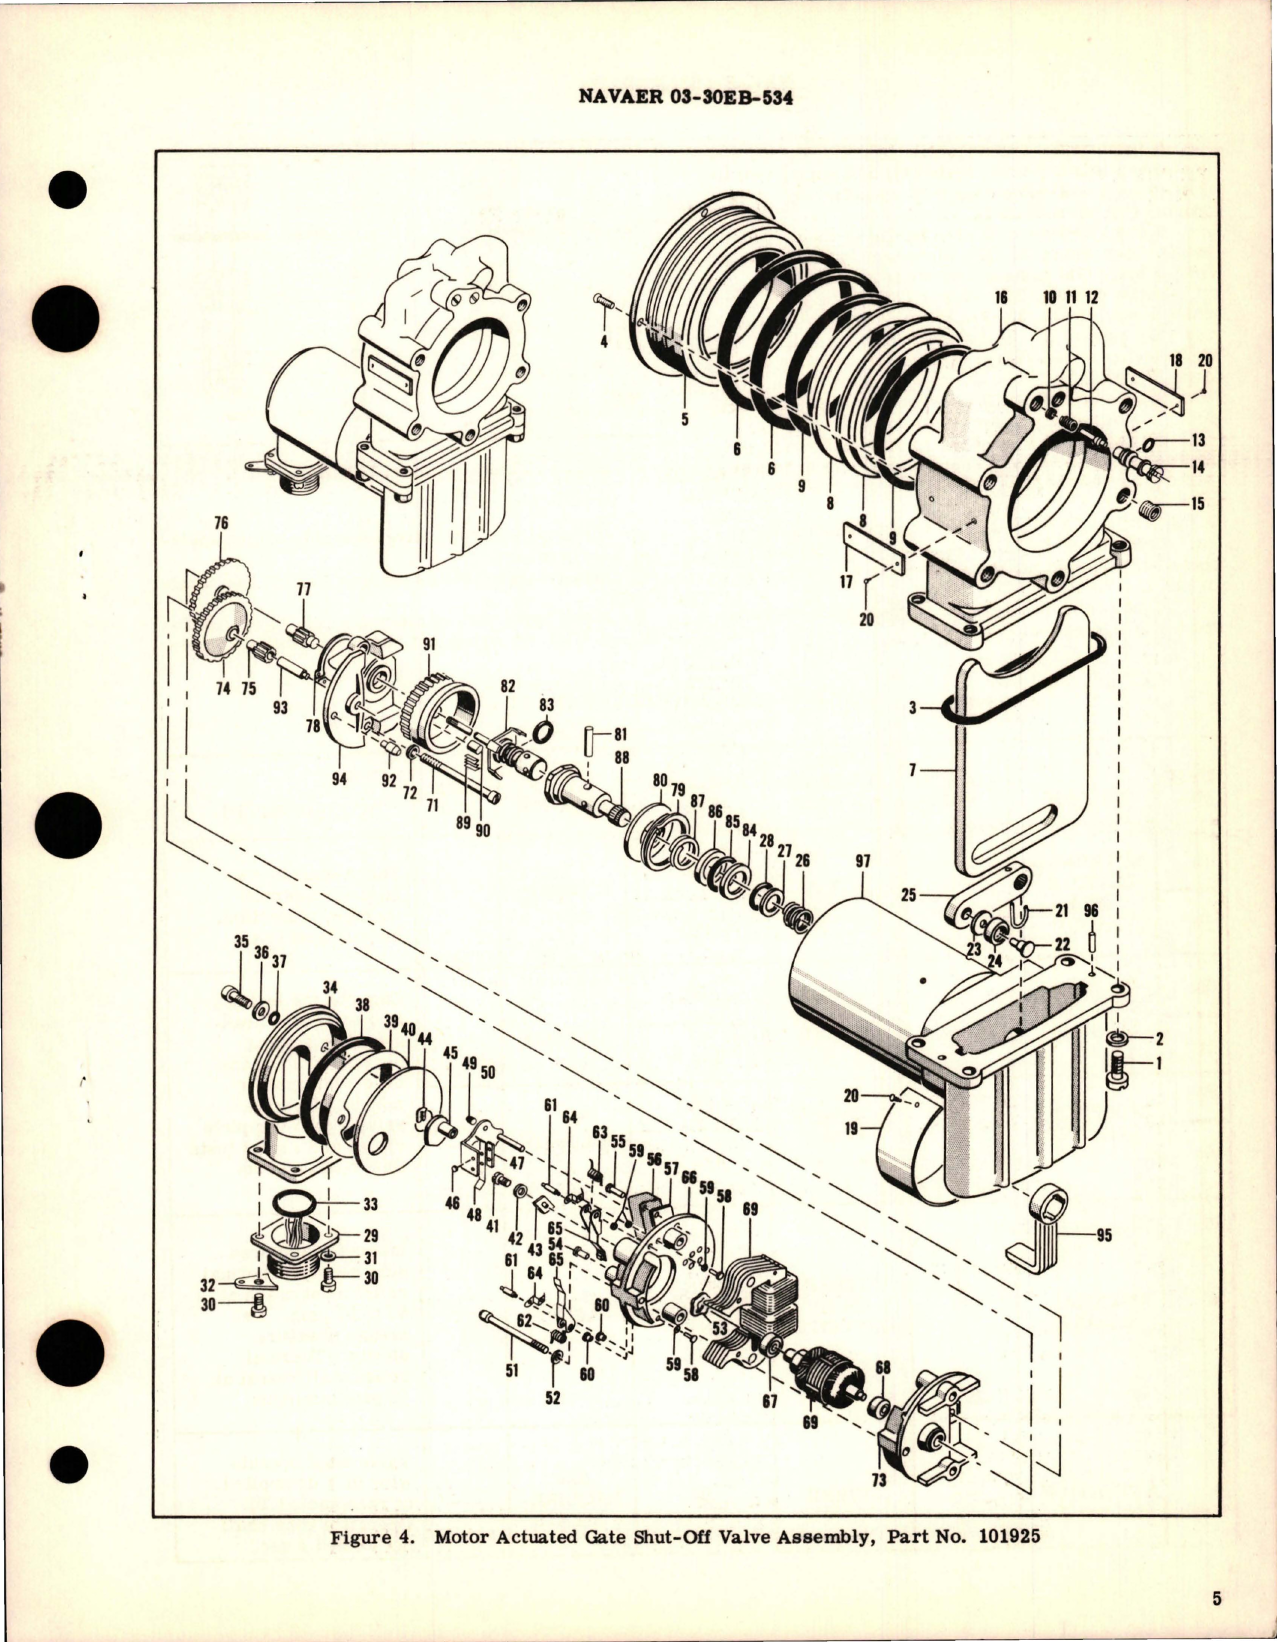 Sample page 5 from AirCorps Library document: Overhaul Instructions with Parts for Motor Actuated Gate Shut Off Valve - Part 101925